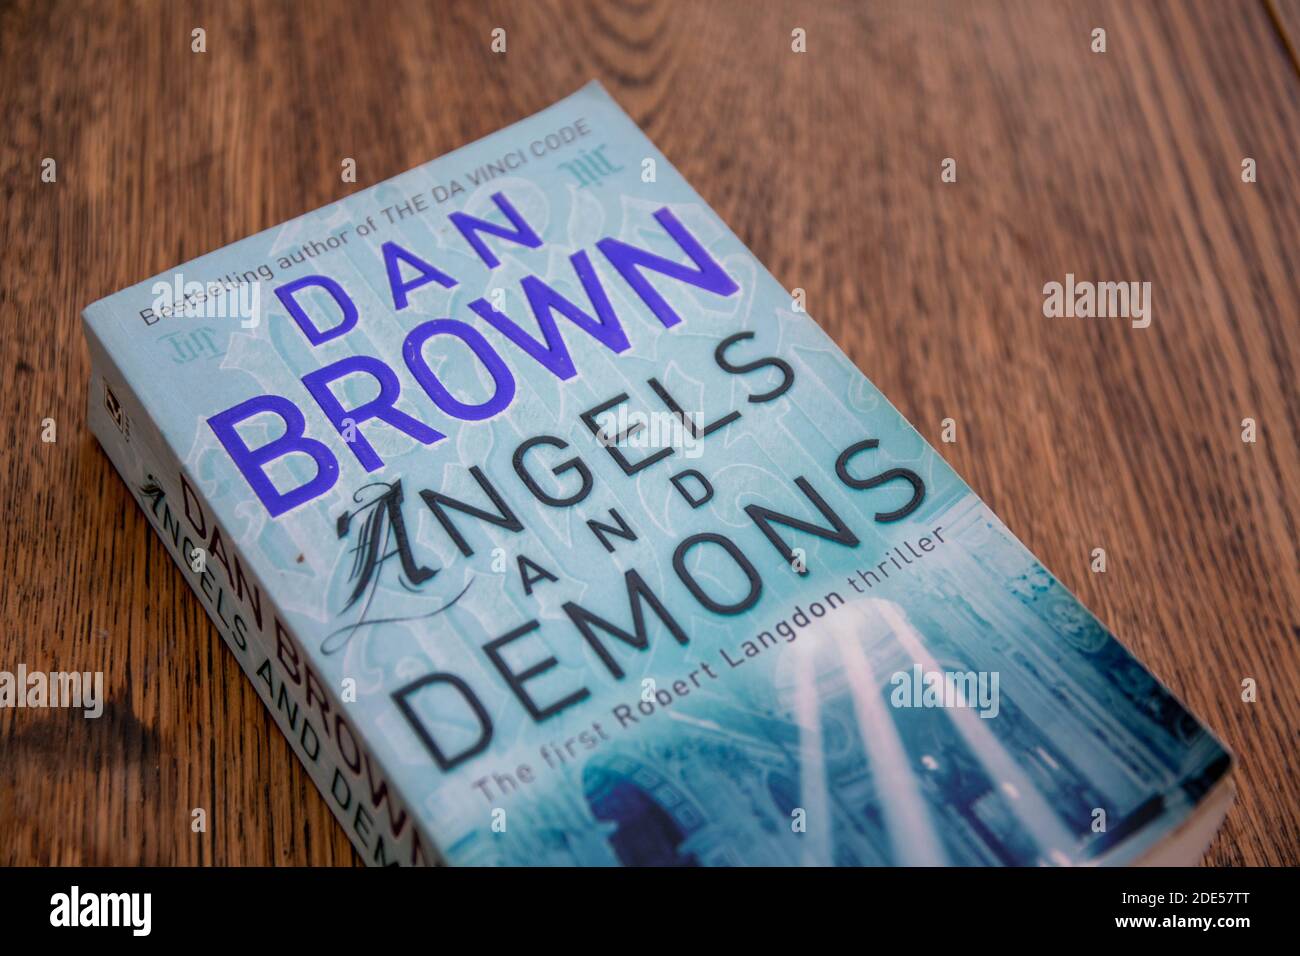 Dan Brown is an American author best known for his thriller Robert Langdon novels Angels & Demons, The Da Vinci Code, The Lost Symbol, Inferno Stock Photo